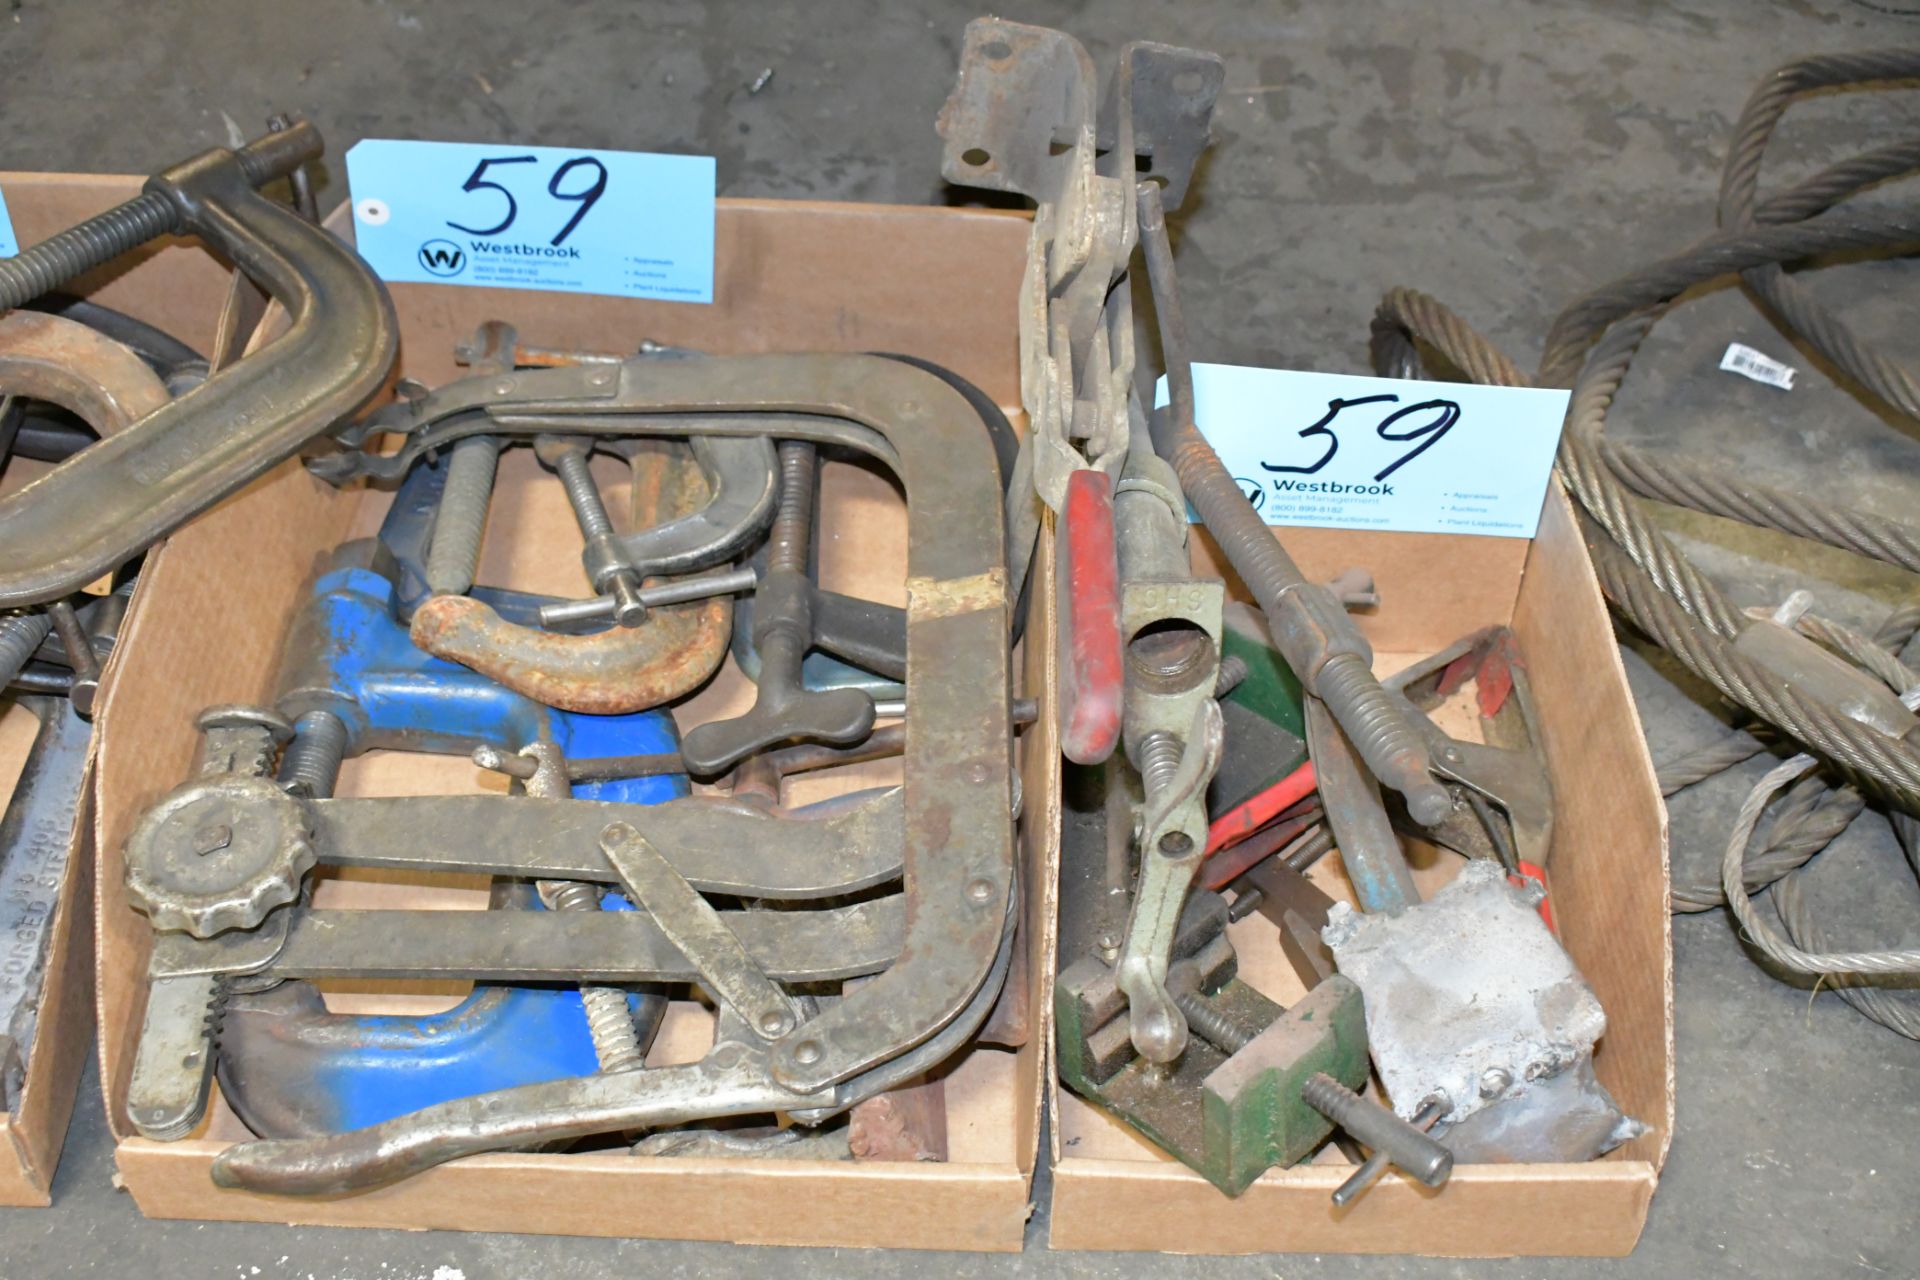 Lot-Various Squeeze Clamps, Die Clamps, Destaco Clamps, C-Clamps, Etc. in (2) Boxes